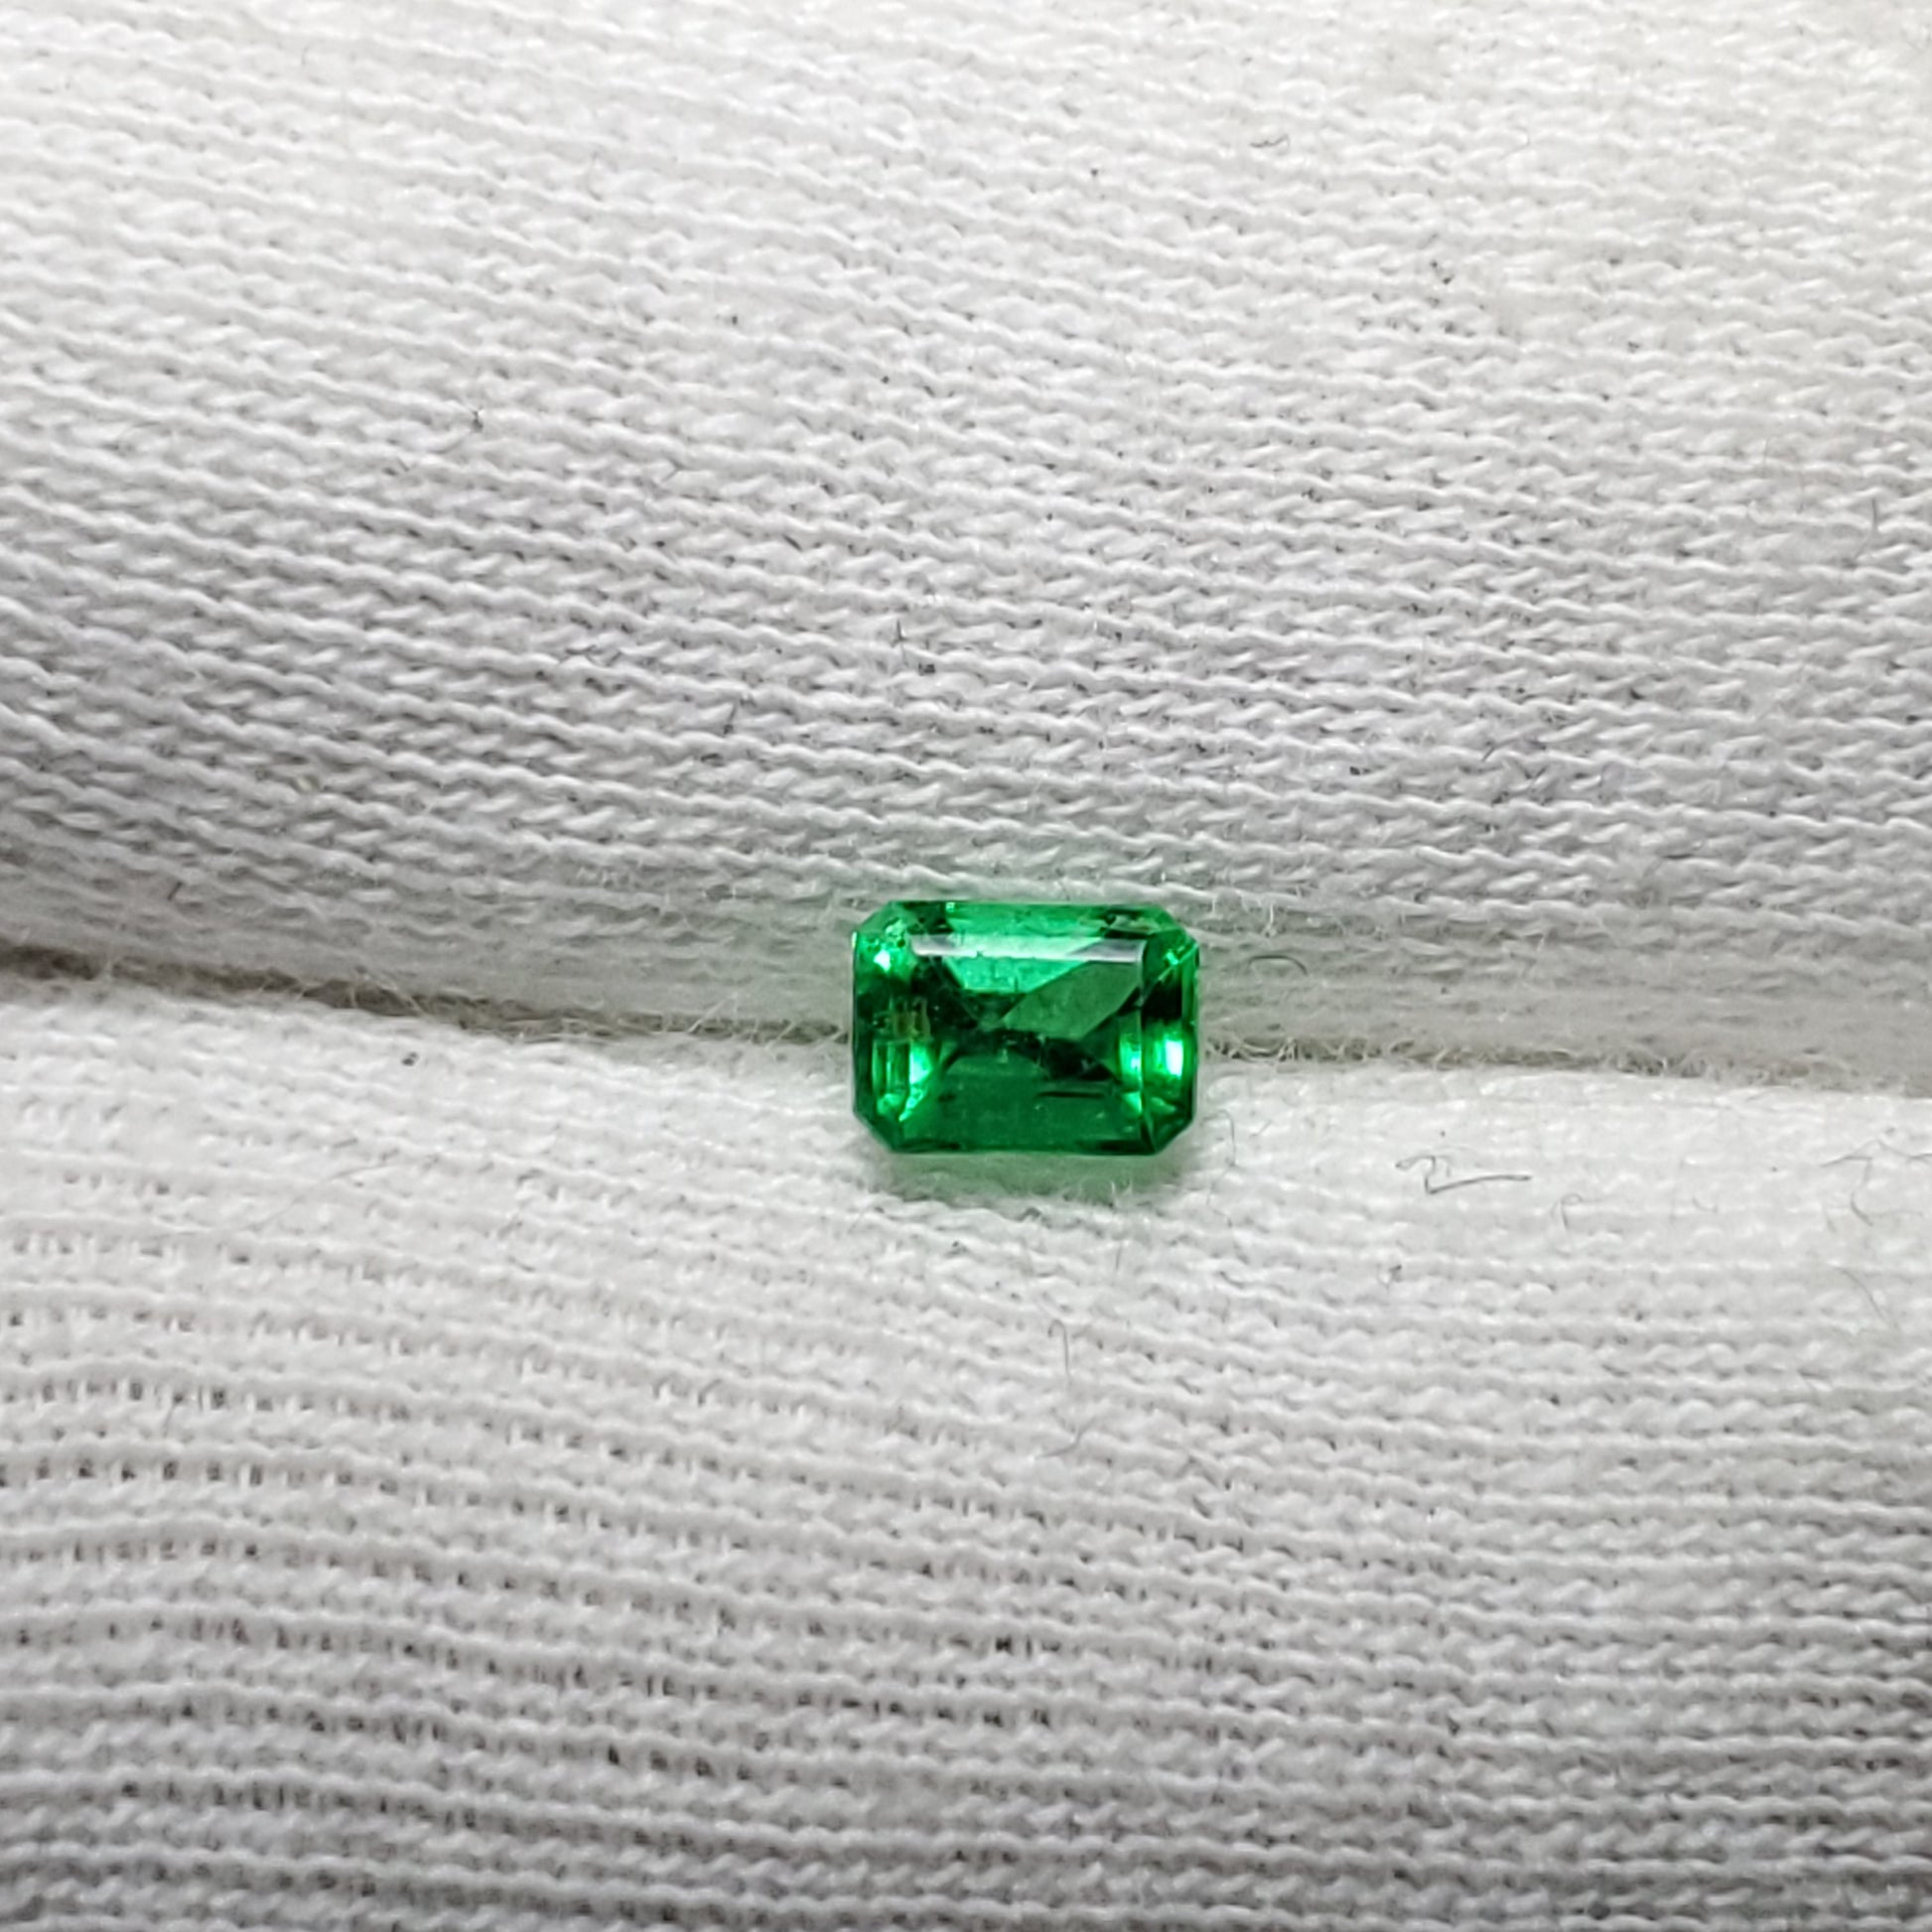 0.41 Ct Colombian Emerald | Northern Gem Supply